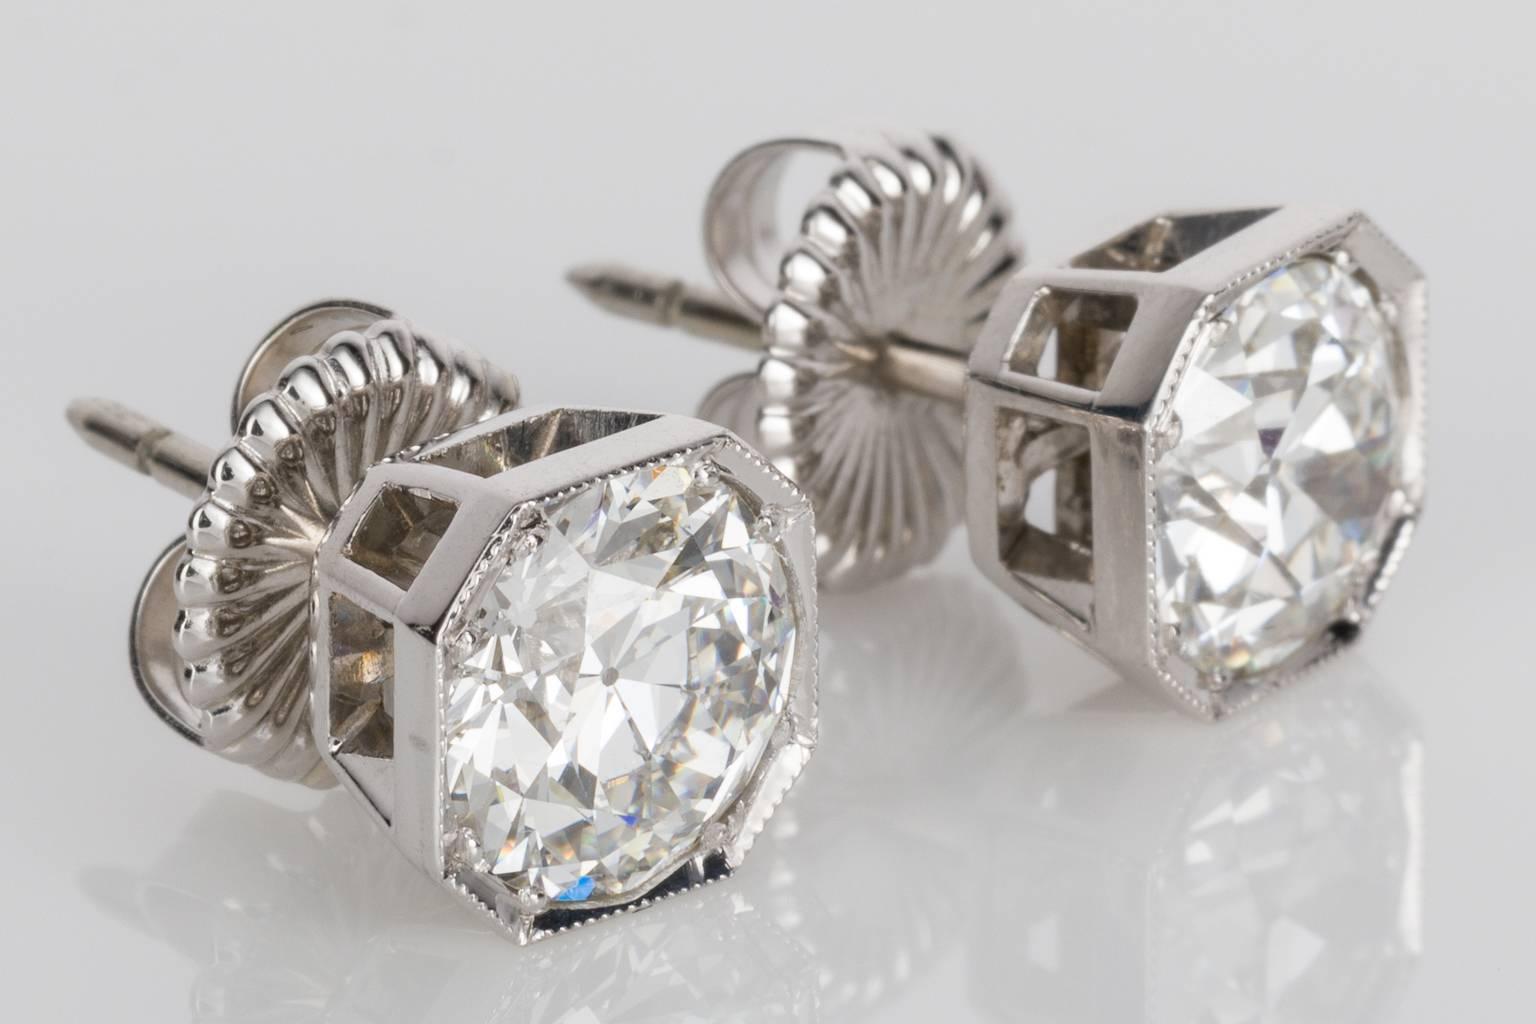 Fabulous, elegant and will be noticed! 4.25ct total diamond studs that are a total knockout. You don't often see bright white old cut diamonds like these. Set in 18k white gold hexagonal shape settings with millegrain detailing on each earring. The